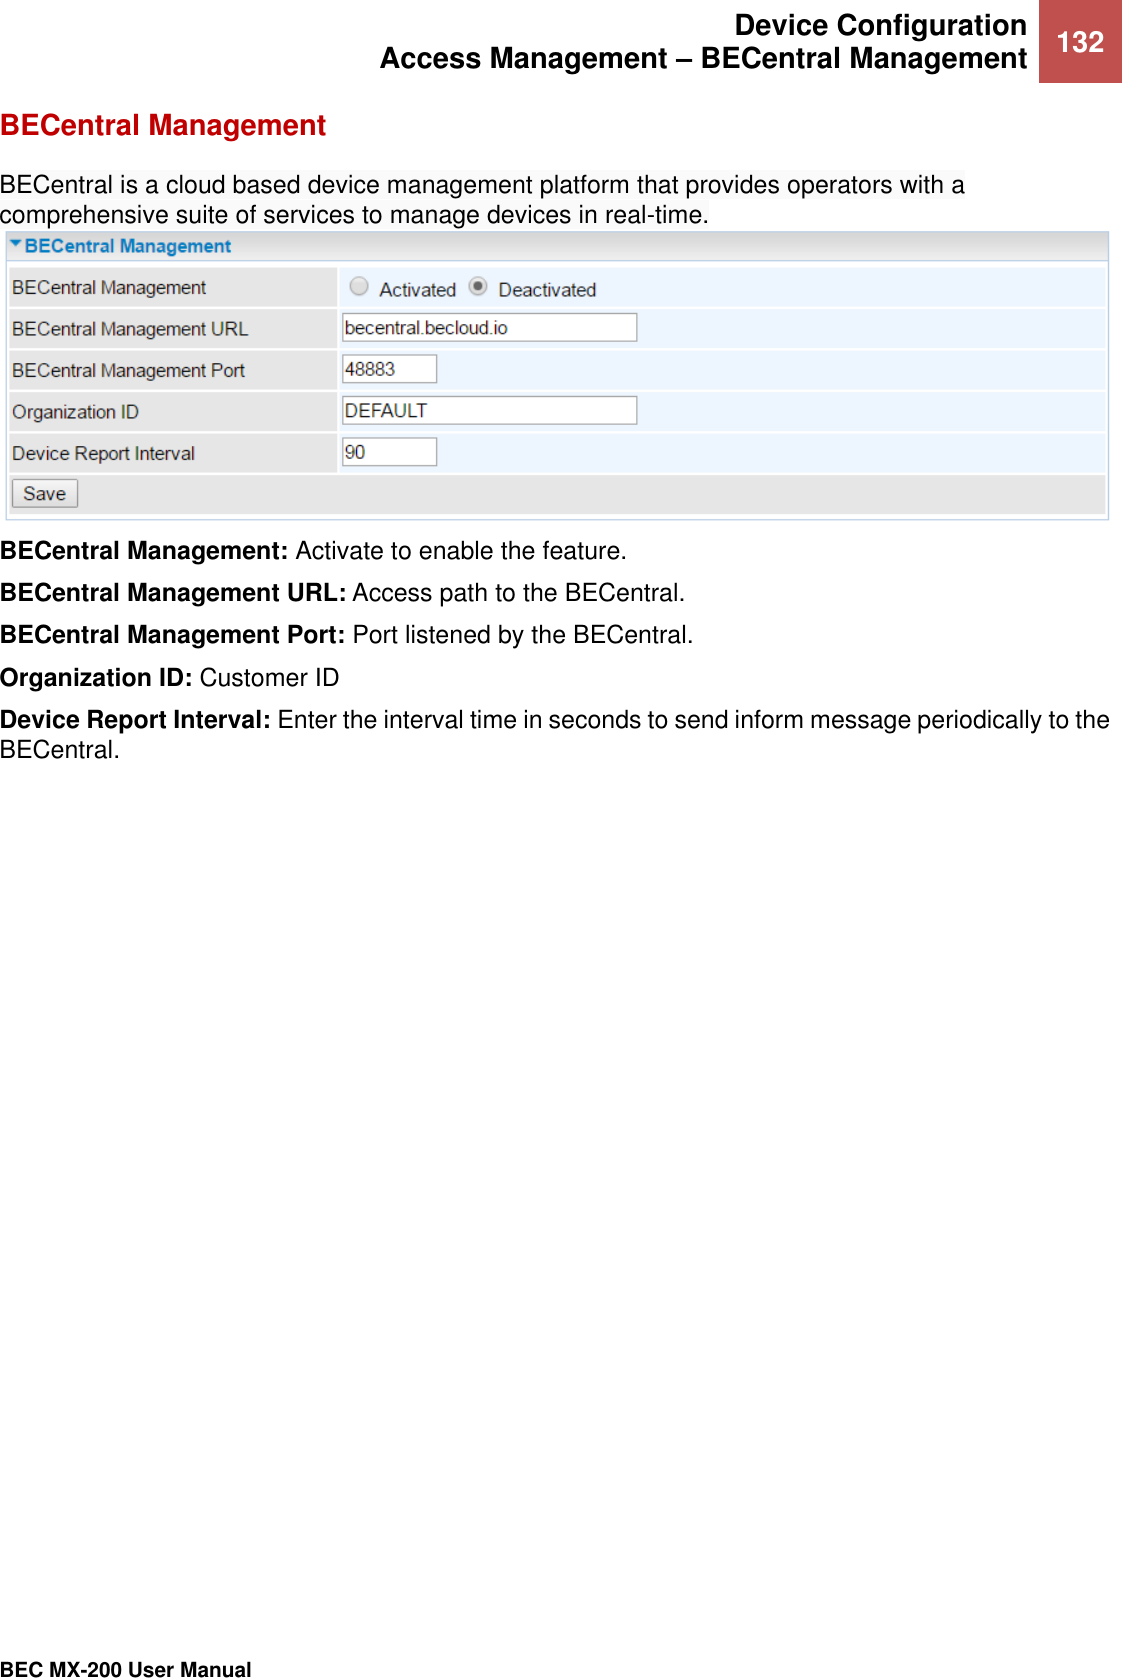  Device Configuration Access Management – BECentral Management 132   BEC MX-200 User Manual  BECentral Management BECentral is a cloud based device management platform that provides operators with a comprehensive suite of services to manage devices in real-time. BECentral Management: Activate to enable the feature. BECentral Management URL: Access path to the BECentral. BECentral Management Port: Port listened by the BECentral. Organization ID: Customer ID Device Report Interval: Enter the interval time in seconds to send inform message periodically to the BECentral. 